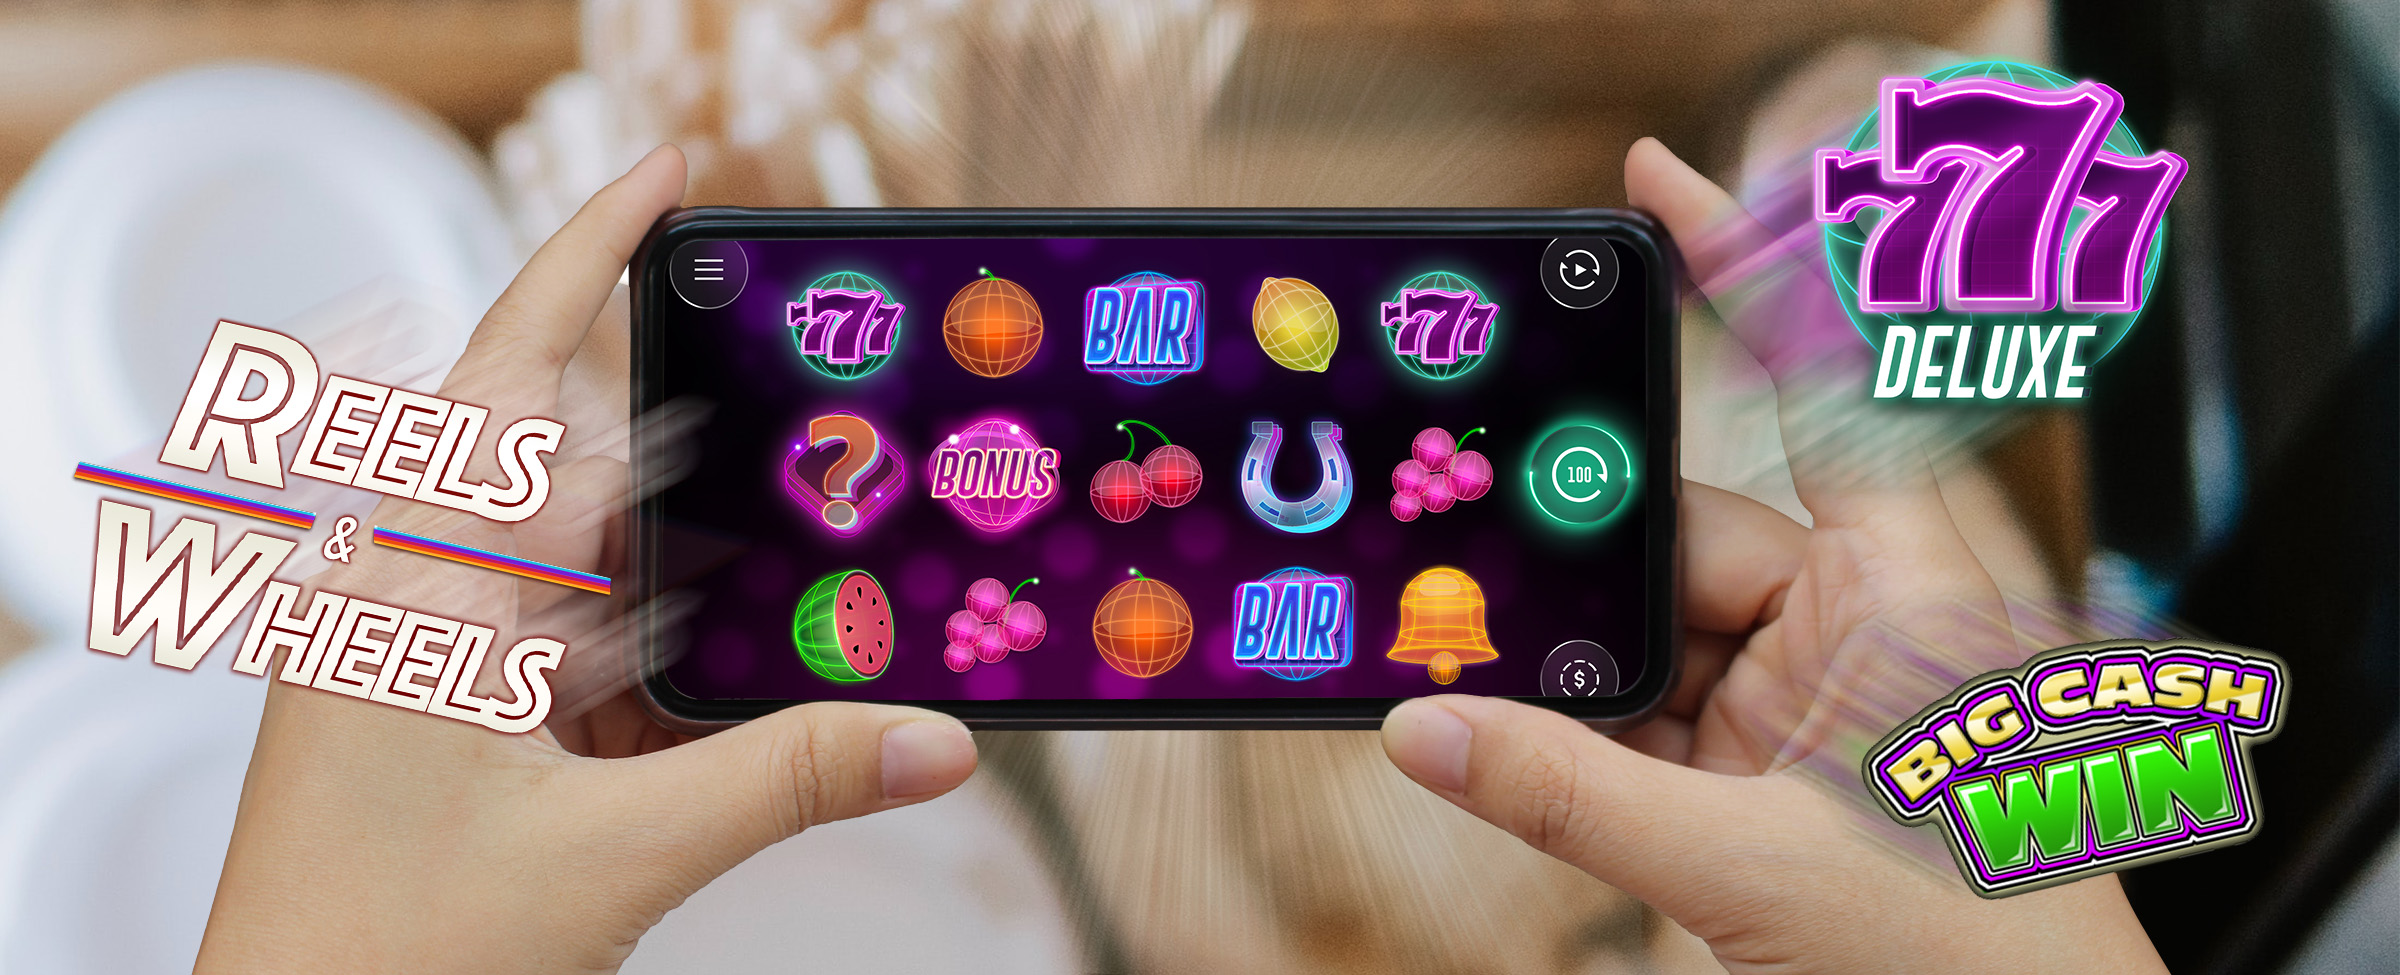 A mobile phone-oriented landscape held by two hands shows a screenshot from the Cafe Casino slot game ‘777 Deluxe’, surrounded by three slot game logos including all 777 Deluxe, Big Cash Win, and Reels and Wheels. In the background is an out-of-focus cafe table.